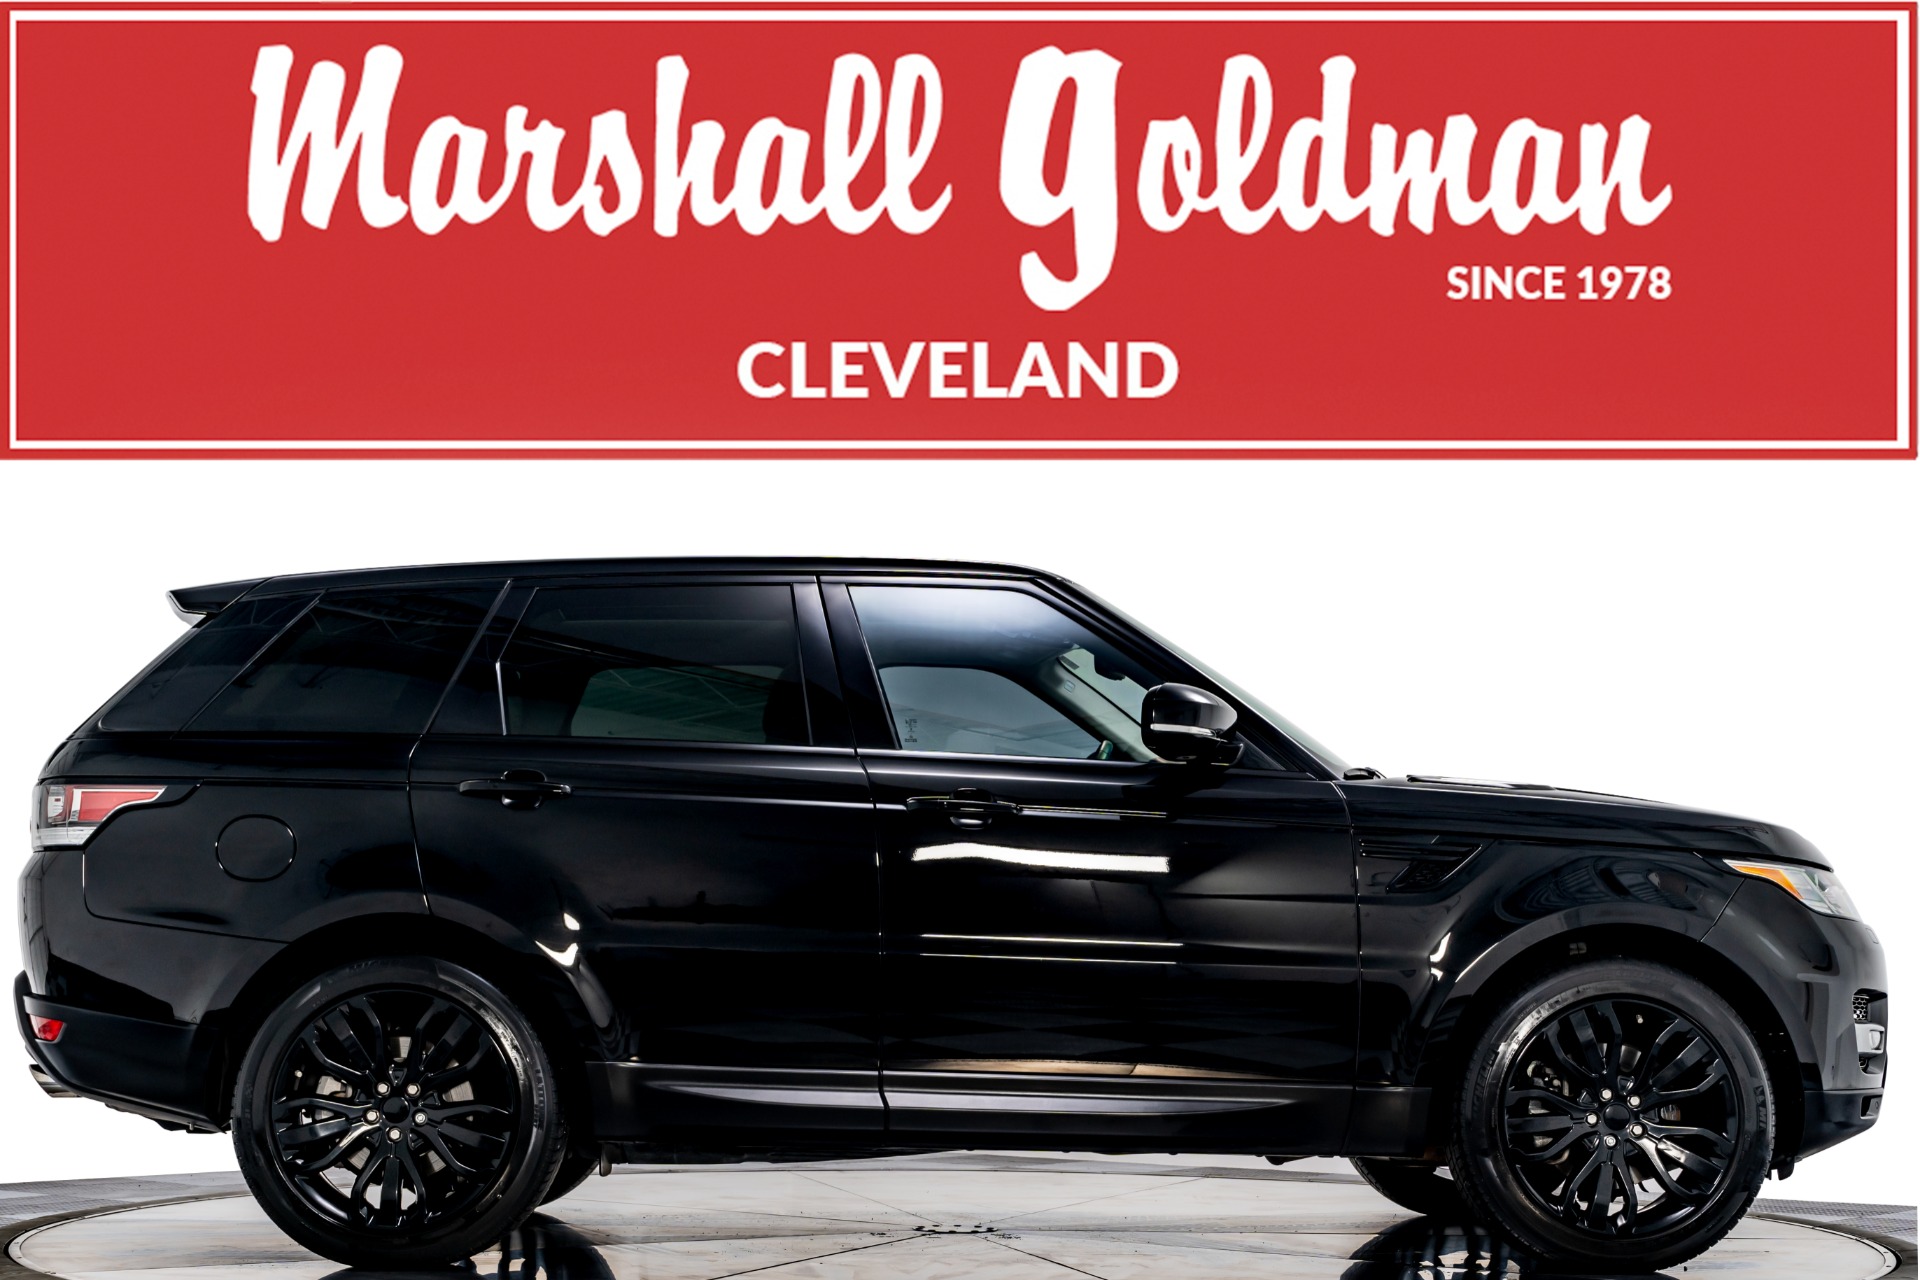 og:title":"Used 2015 Land Rover Range Rover Sport HSE For Sale (Sold) | Marshall Goldman Motor Sales Stock #W21198","og:description":"Used 2015 Land Range Rover Sport HSE Stock # W21198 in Warrensville Heights, OH